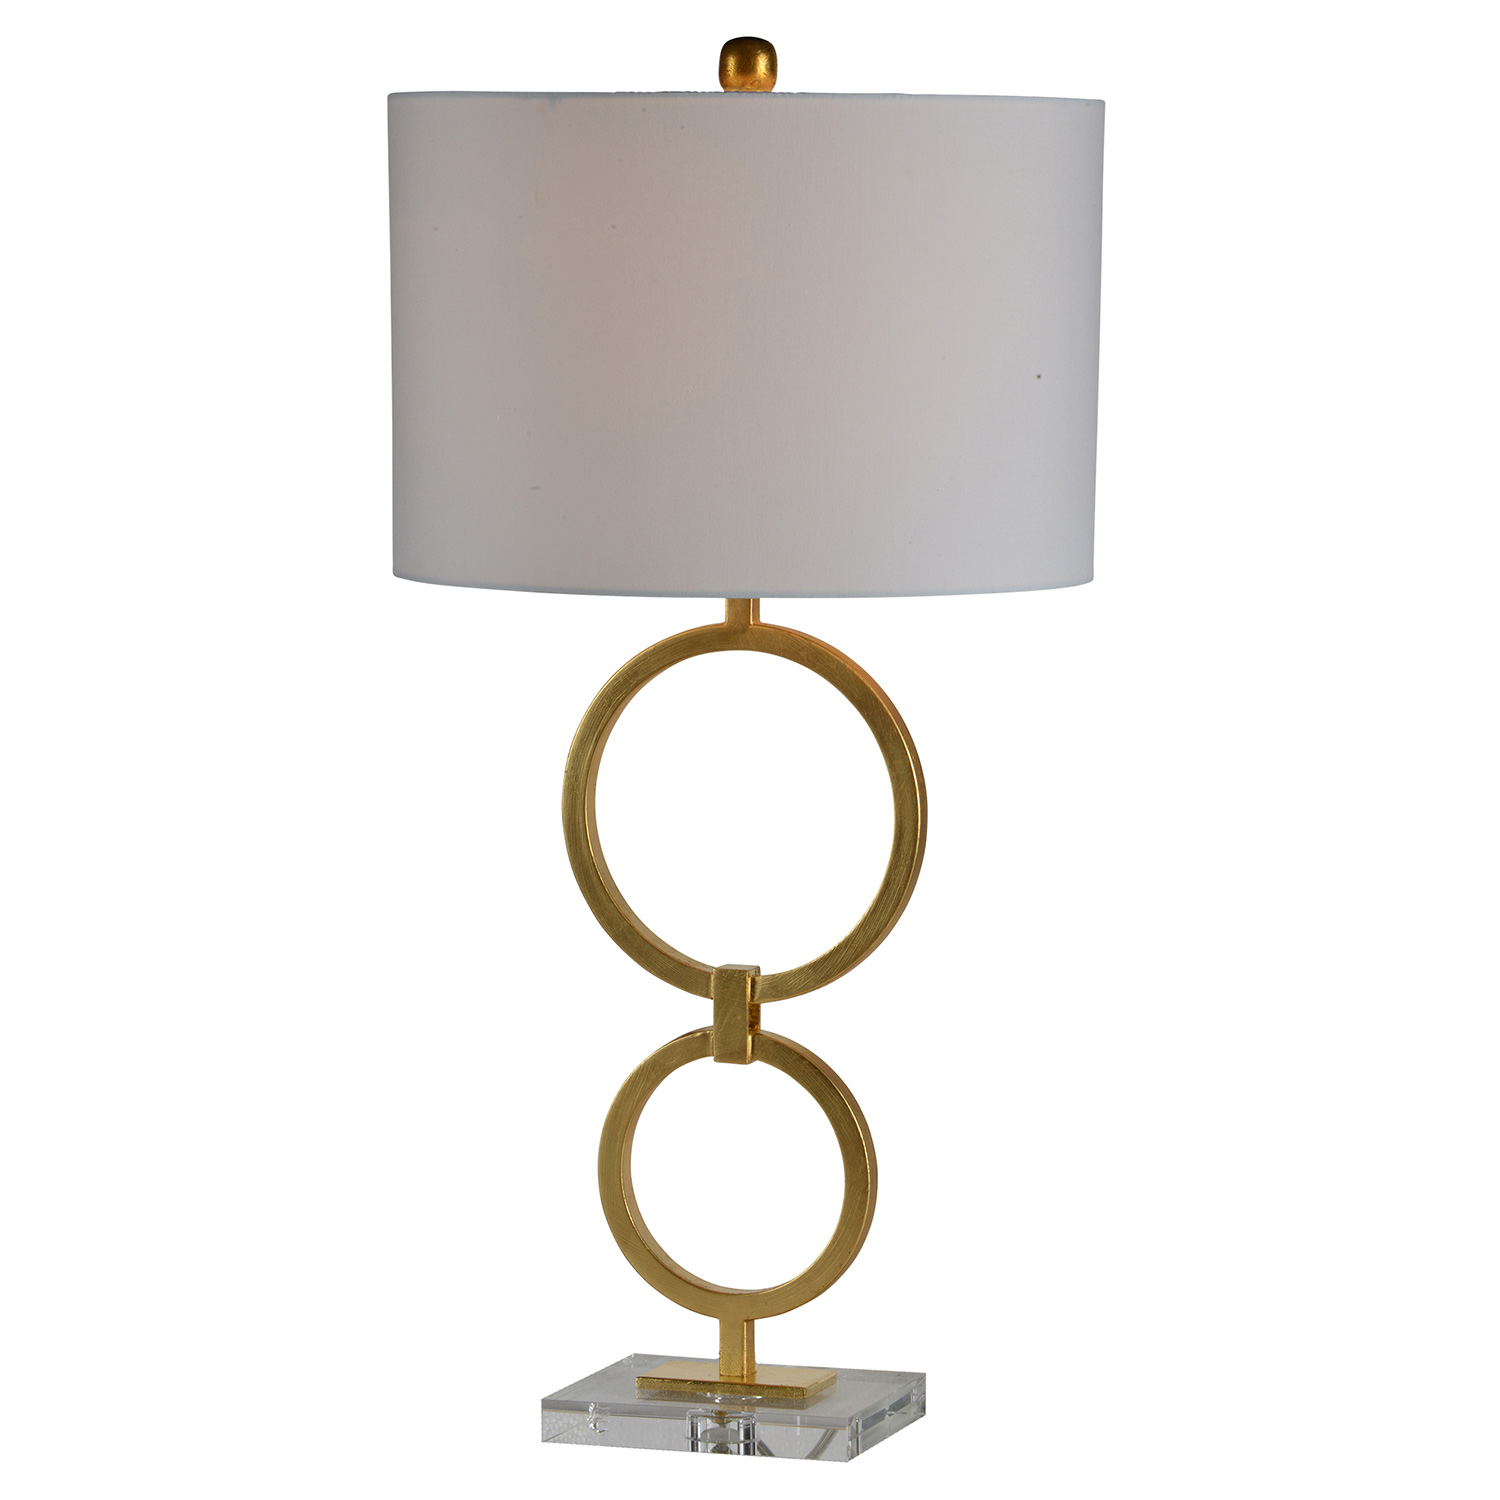 Ren-Wil Stack Table Lamp - Gold leaf